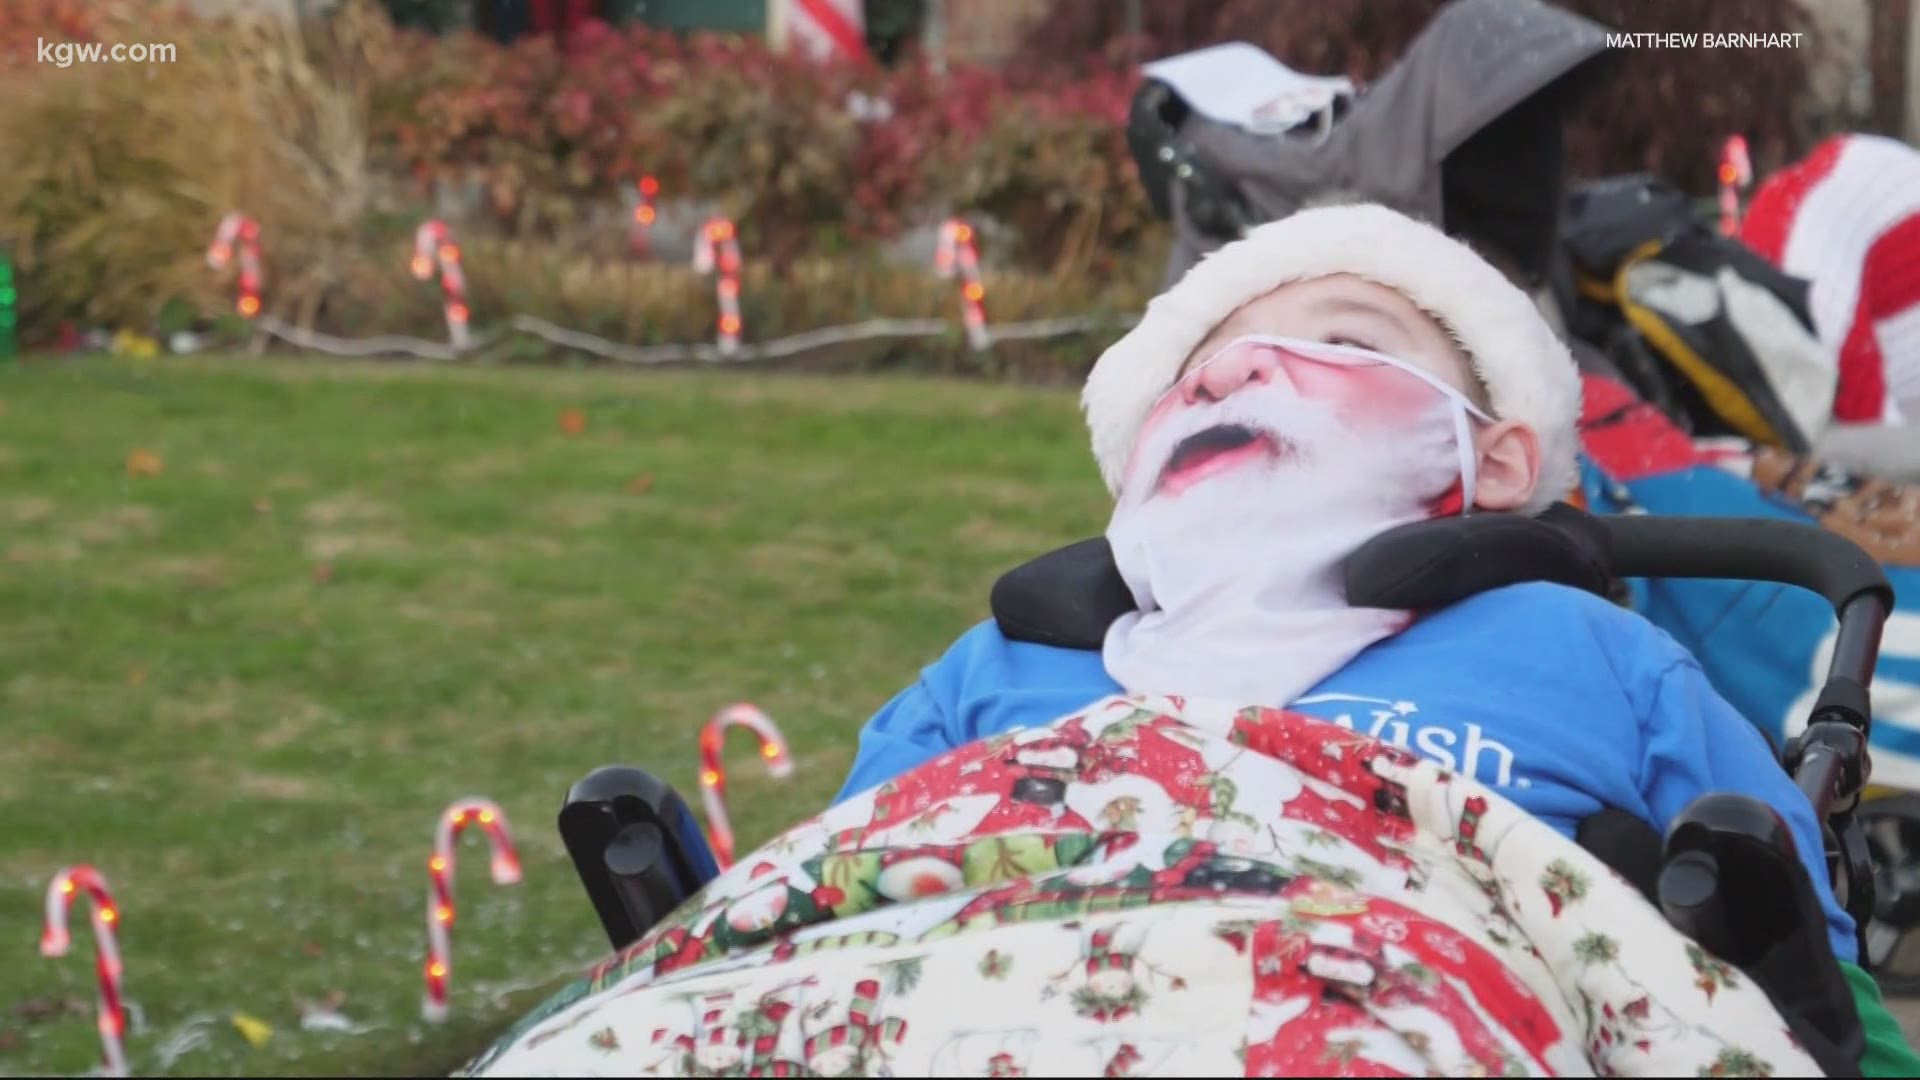 Make-A-Wish Oregon threw a Christmas party for the 9-year-old Springfield boy, uniting a community with people across the country.